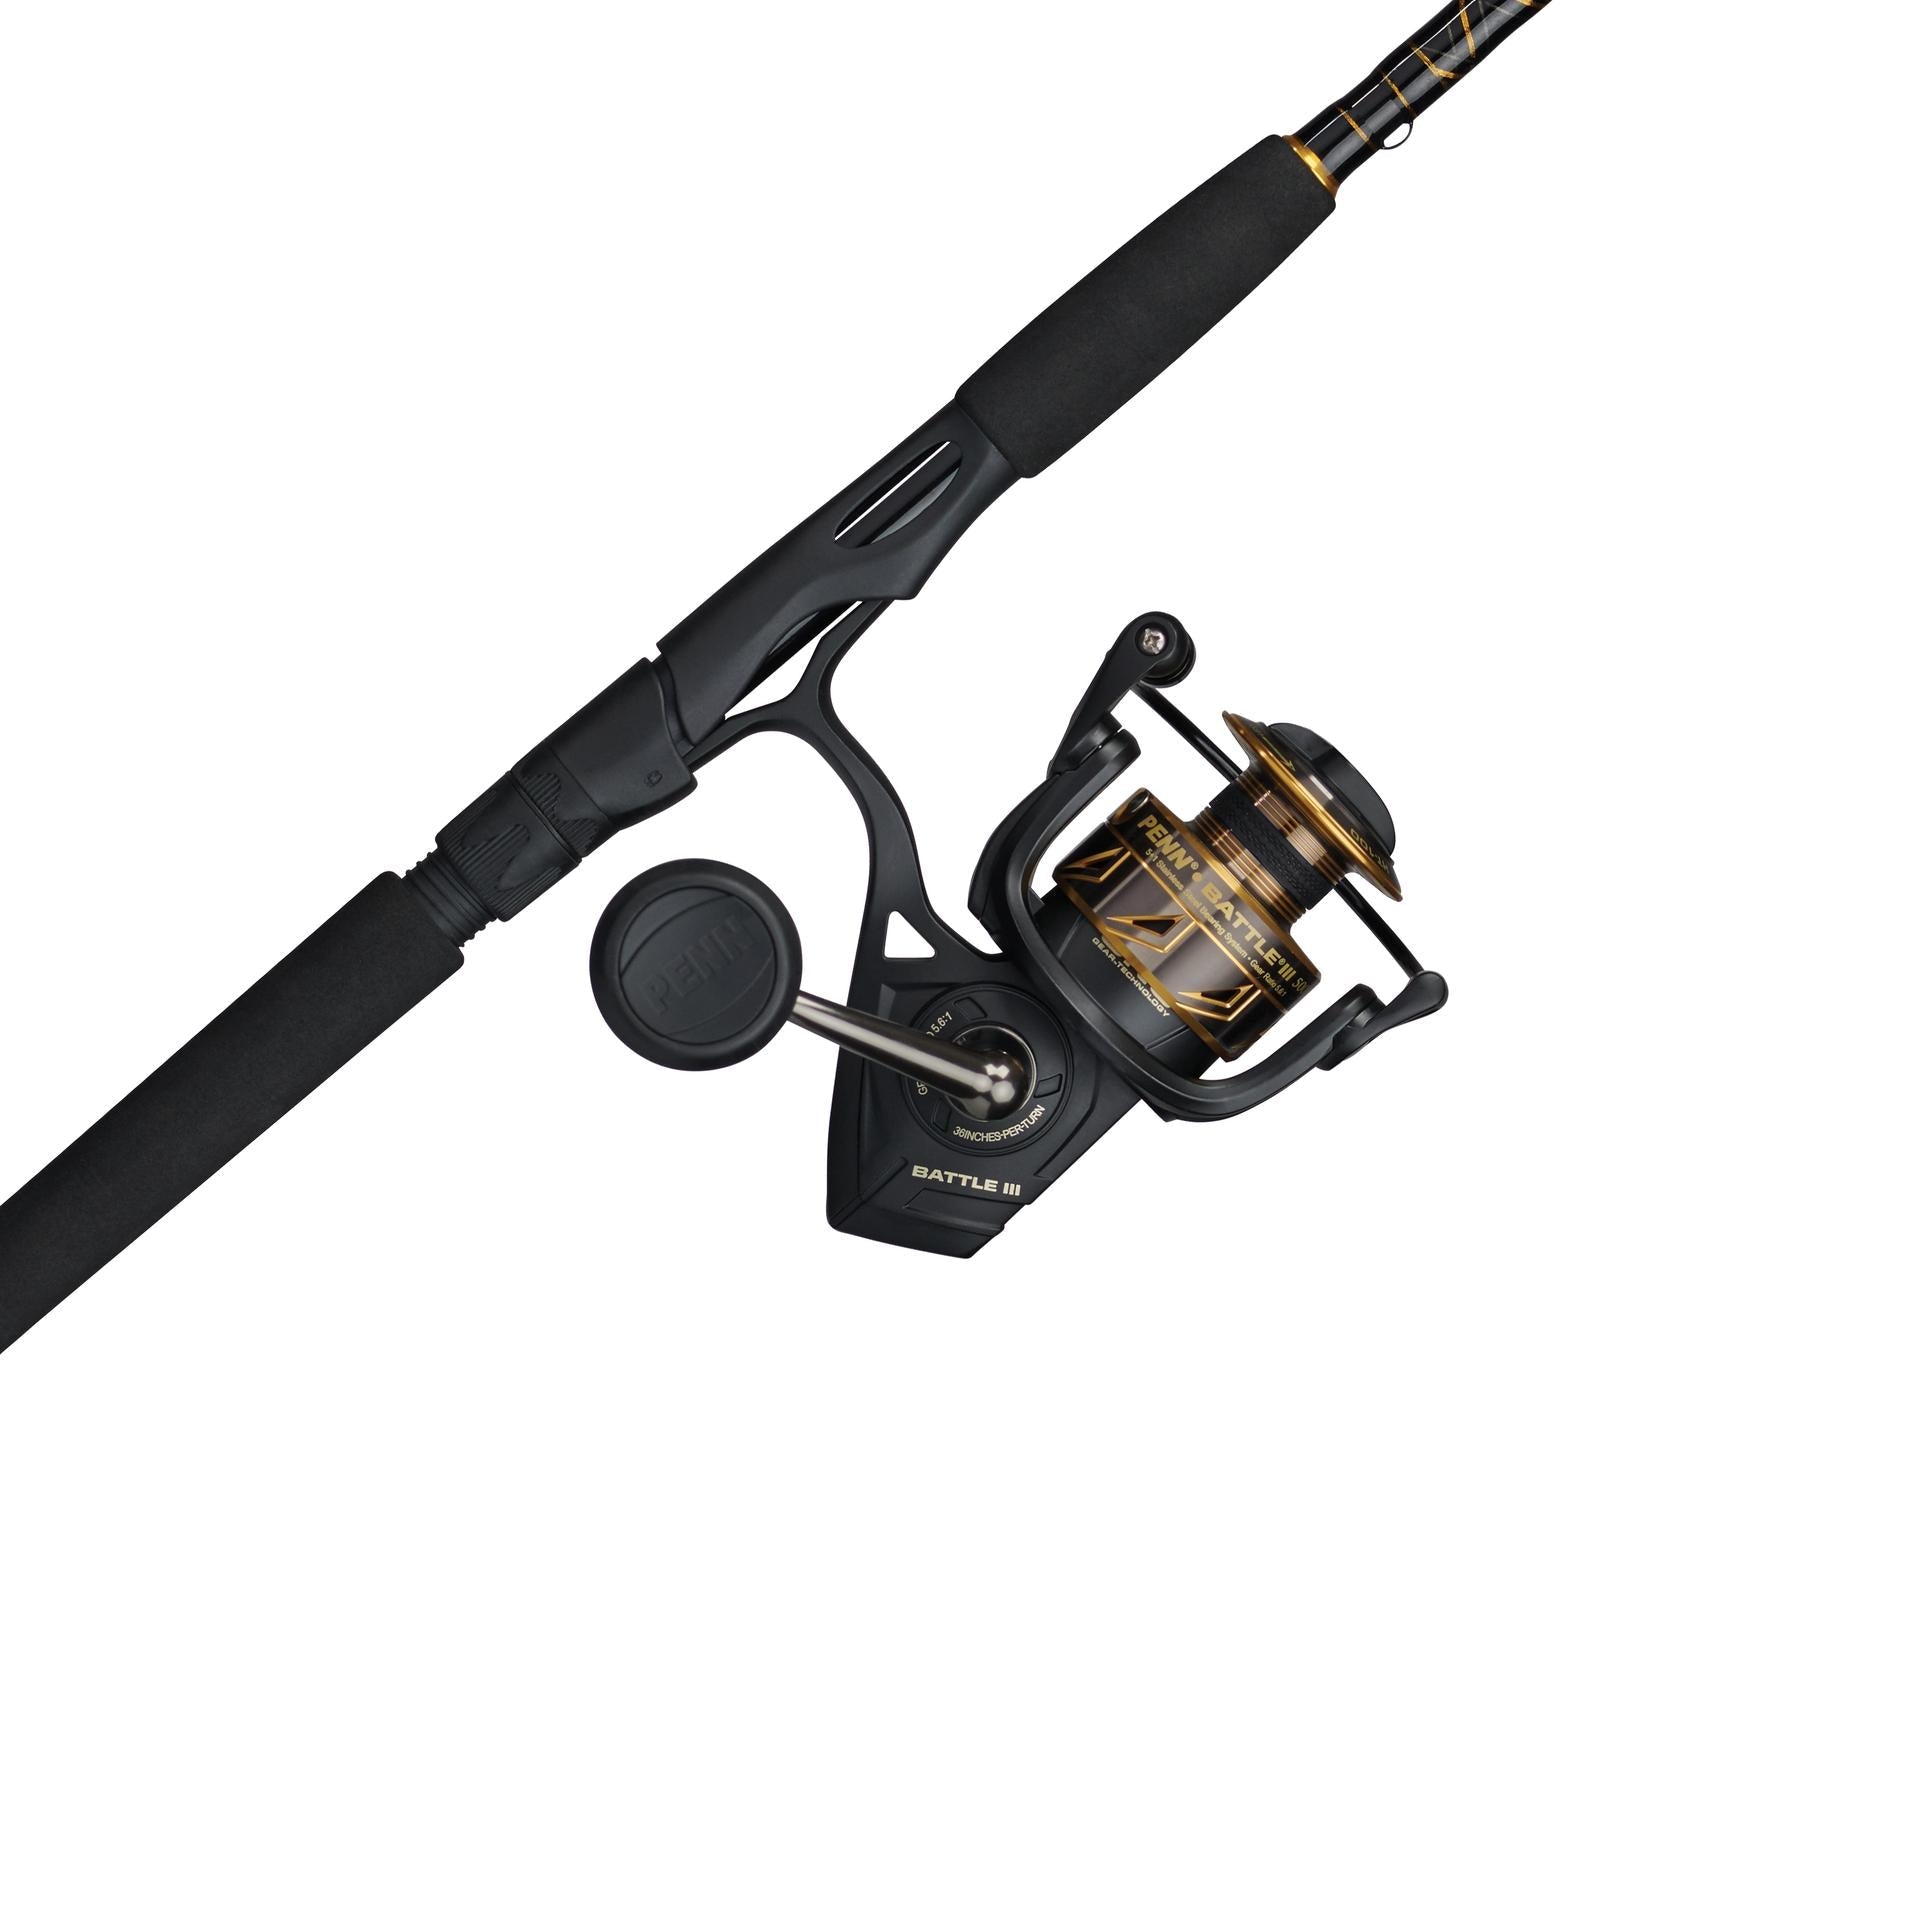 Is This The BEST SURF Fishing REEL For The $$$? - PENN Pursuit IV Rod and  Reel Review 